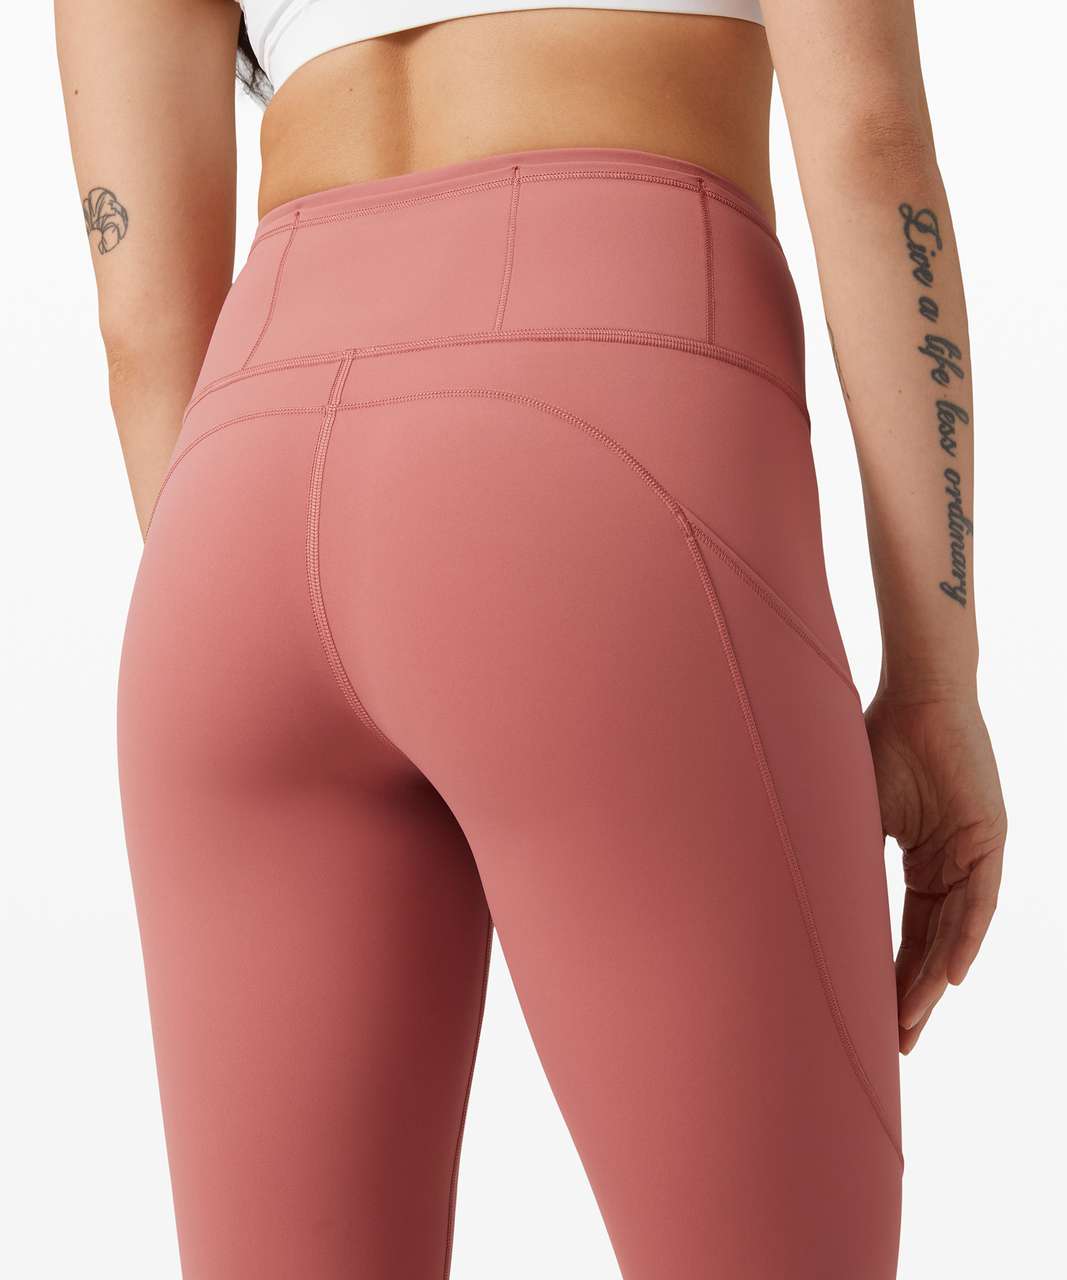 Lululemon Fast and Free High-Rise Tight 28" *Non-Reflective Brushed Nulux - Cherry Tint